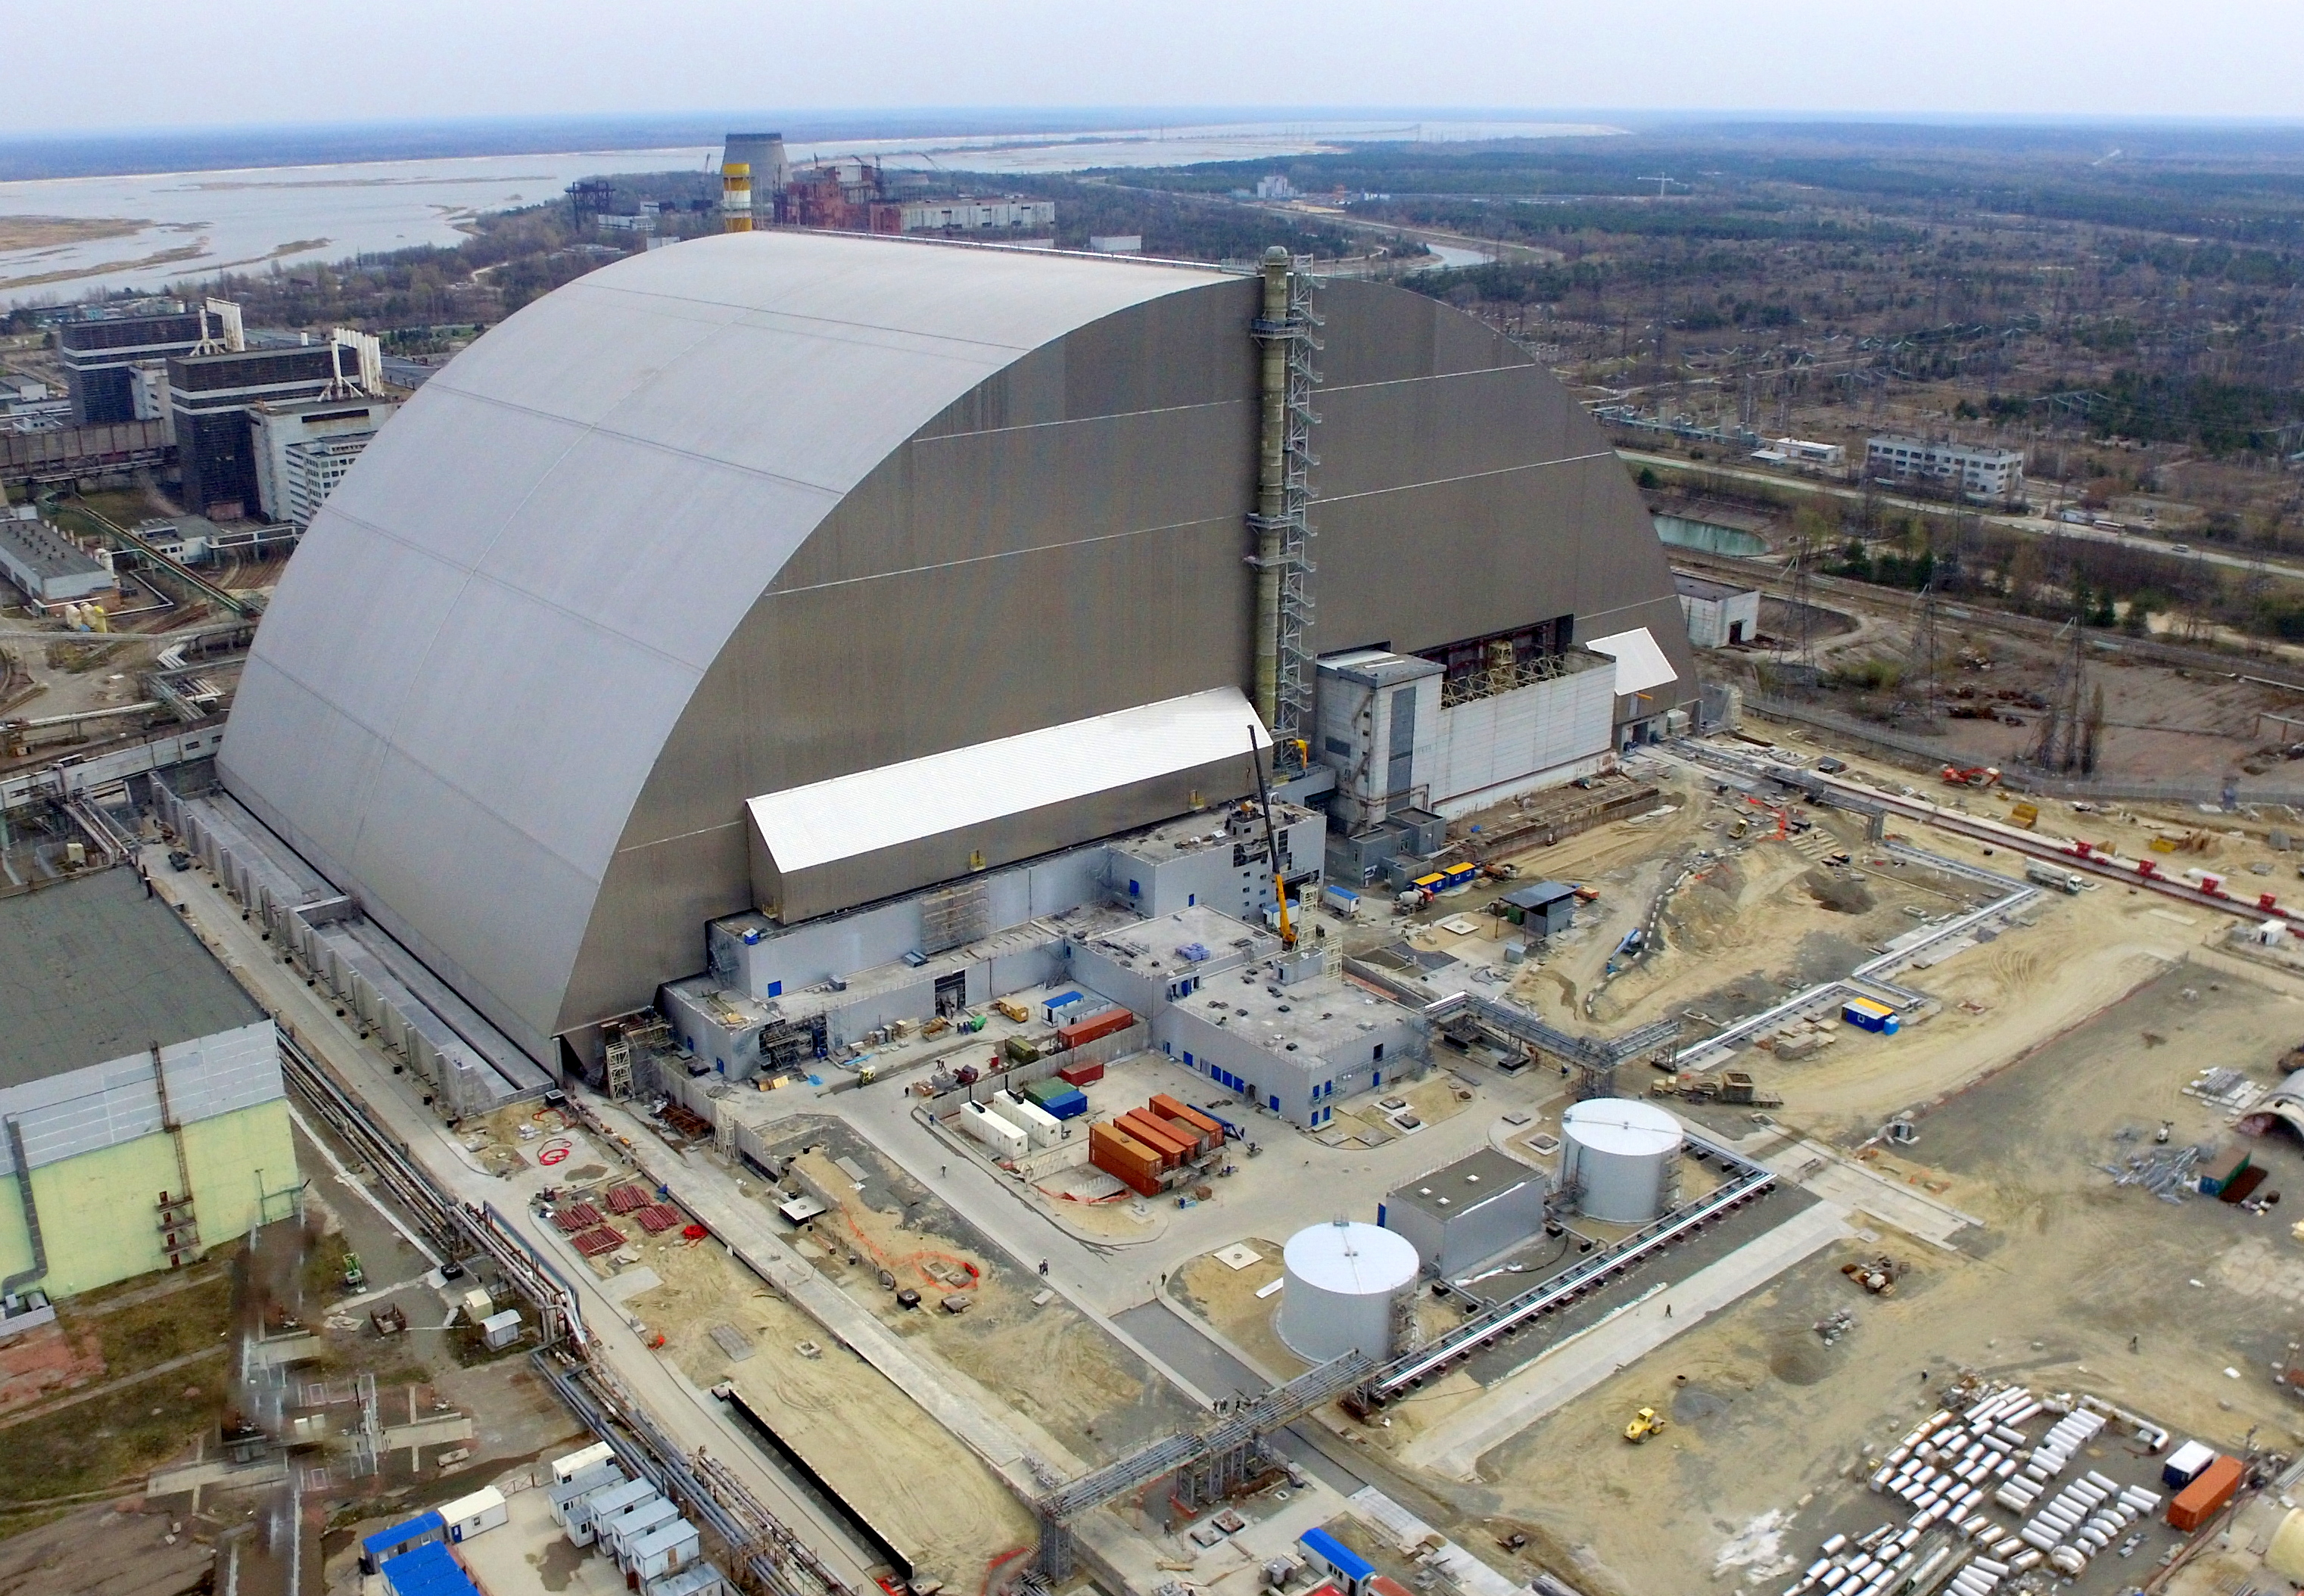 Scottish firm unveils monitoring role at Chernobyl reactor